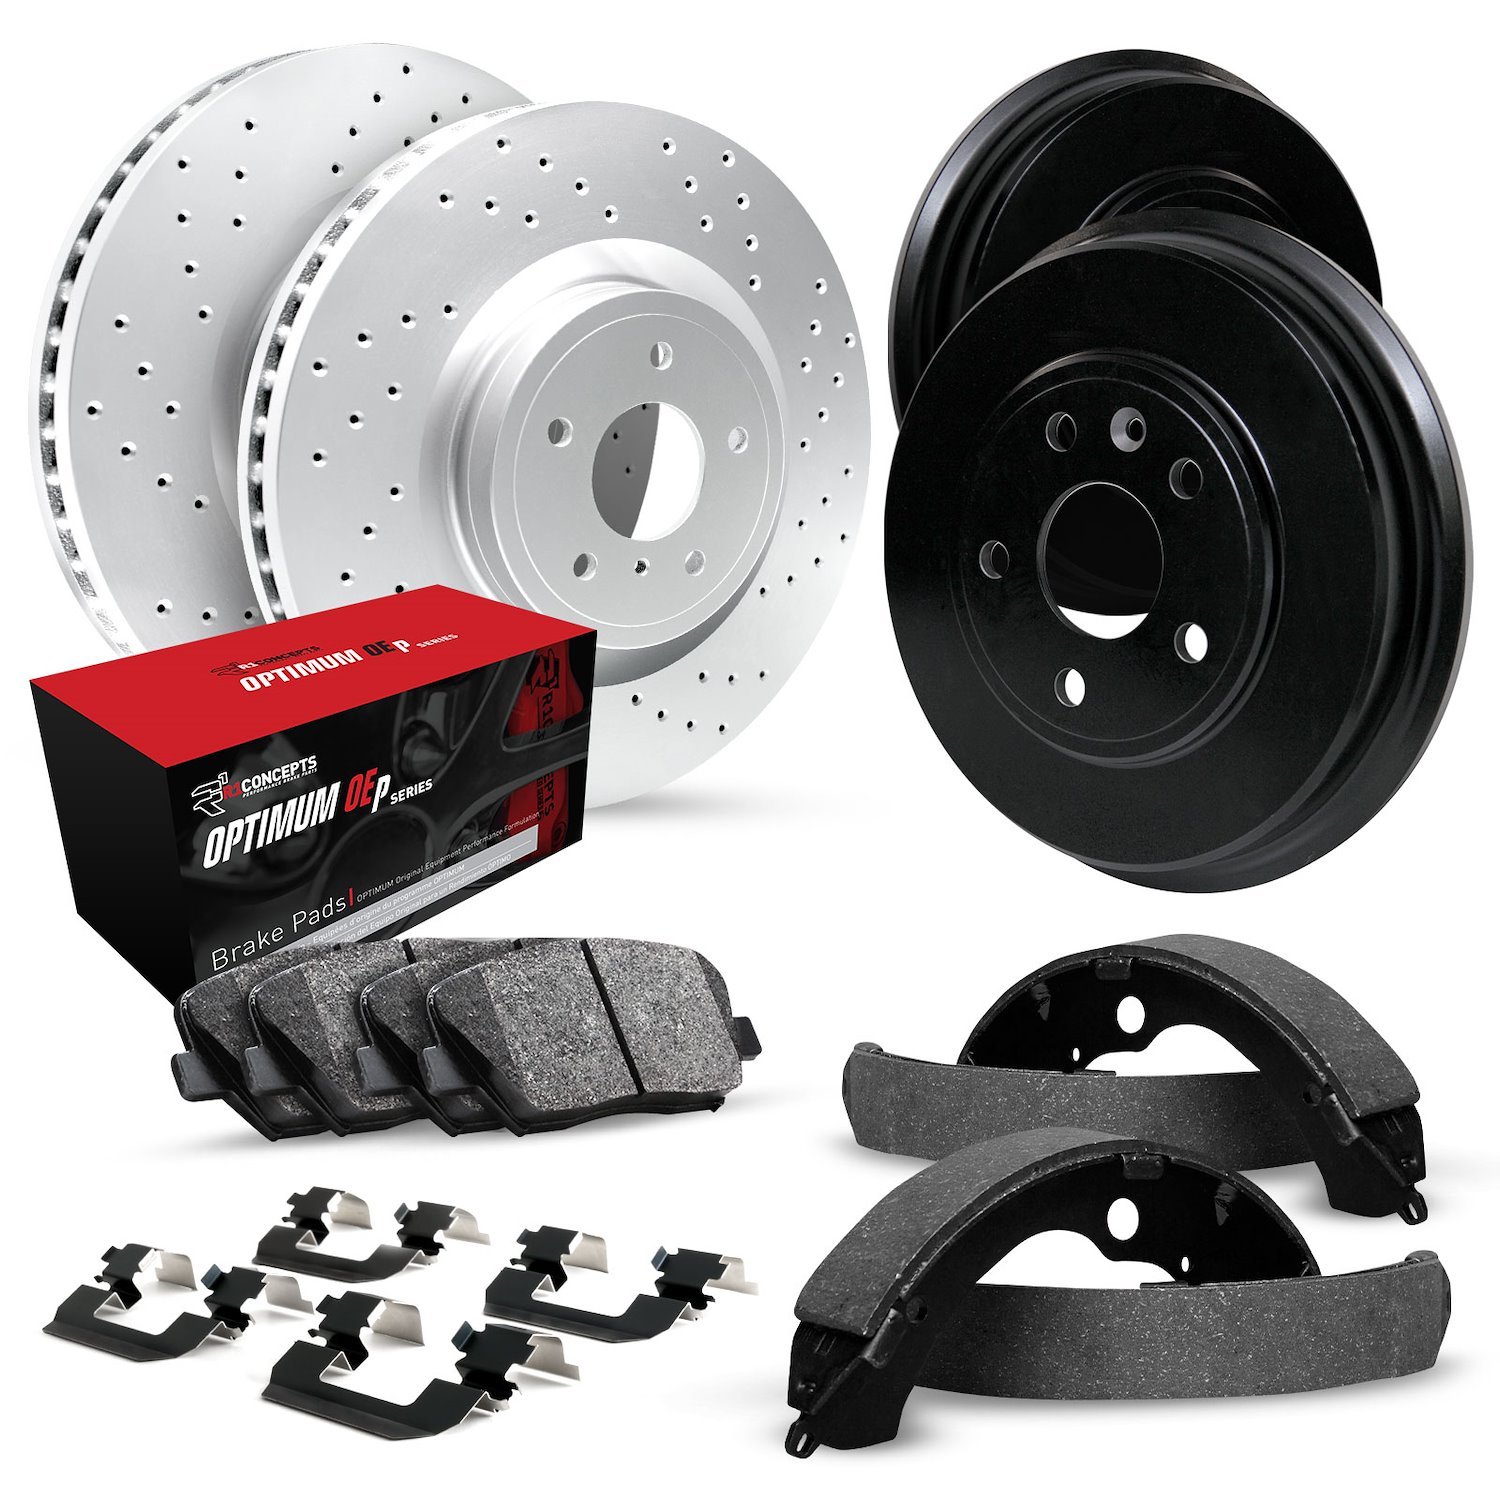 GEO-Carbon Drilled Brake Rotor & Drum Set w/Optimum OE Pads, Shoes, & Hardware, 1987-1991 GM, Position: Front & Rear